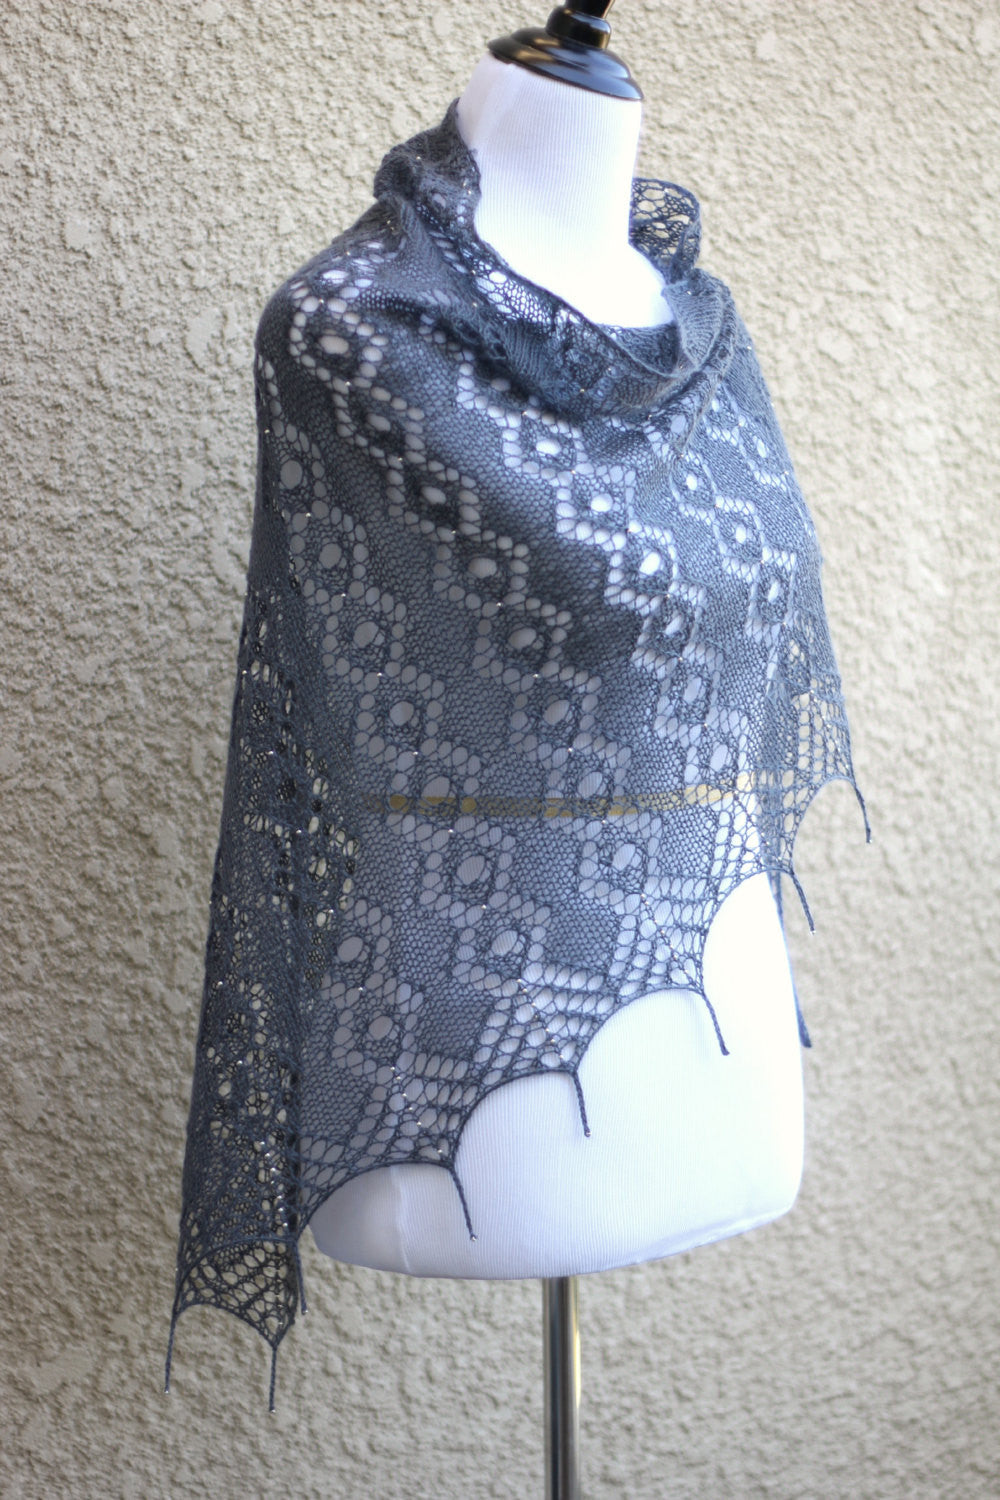 Knit shawl with beads